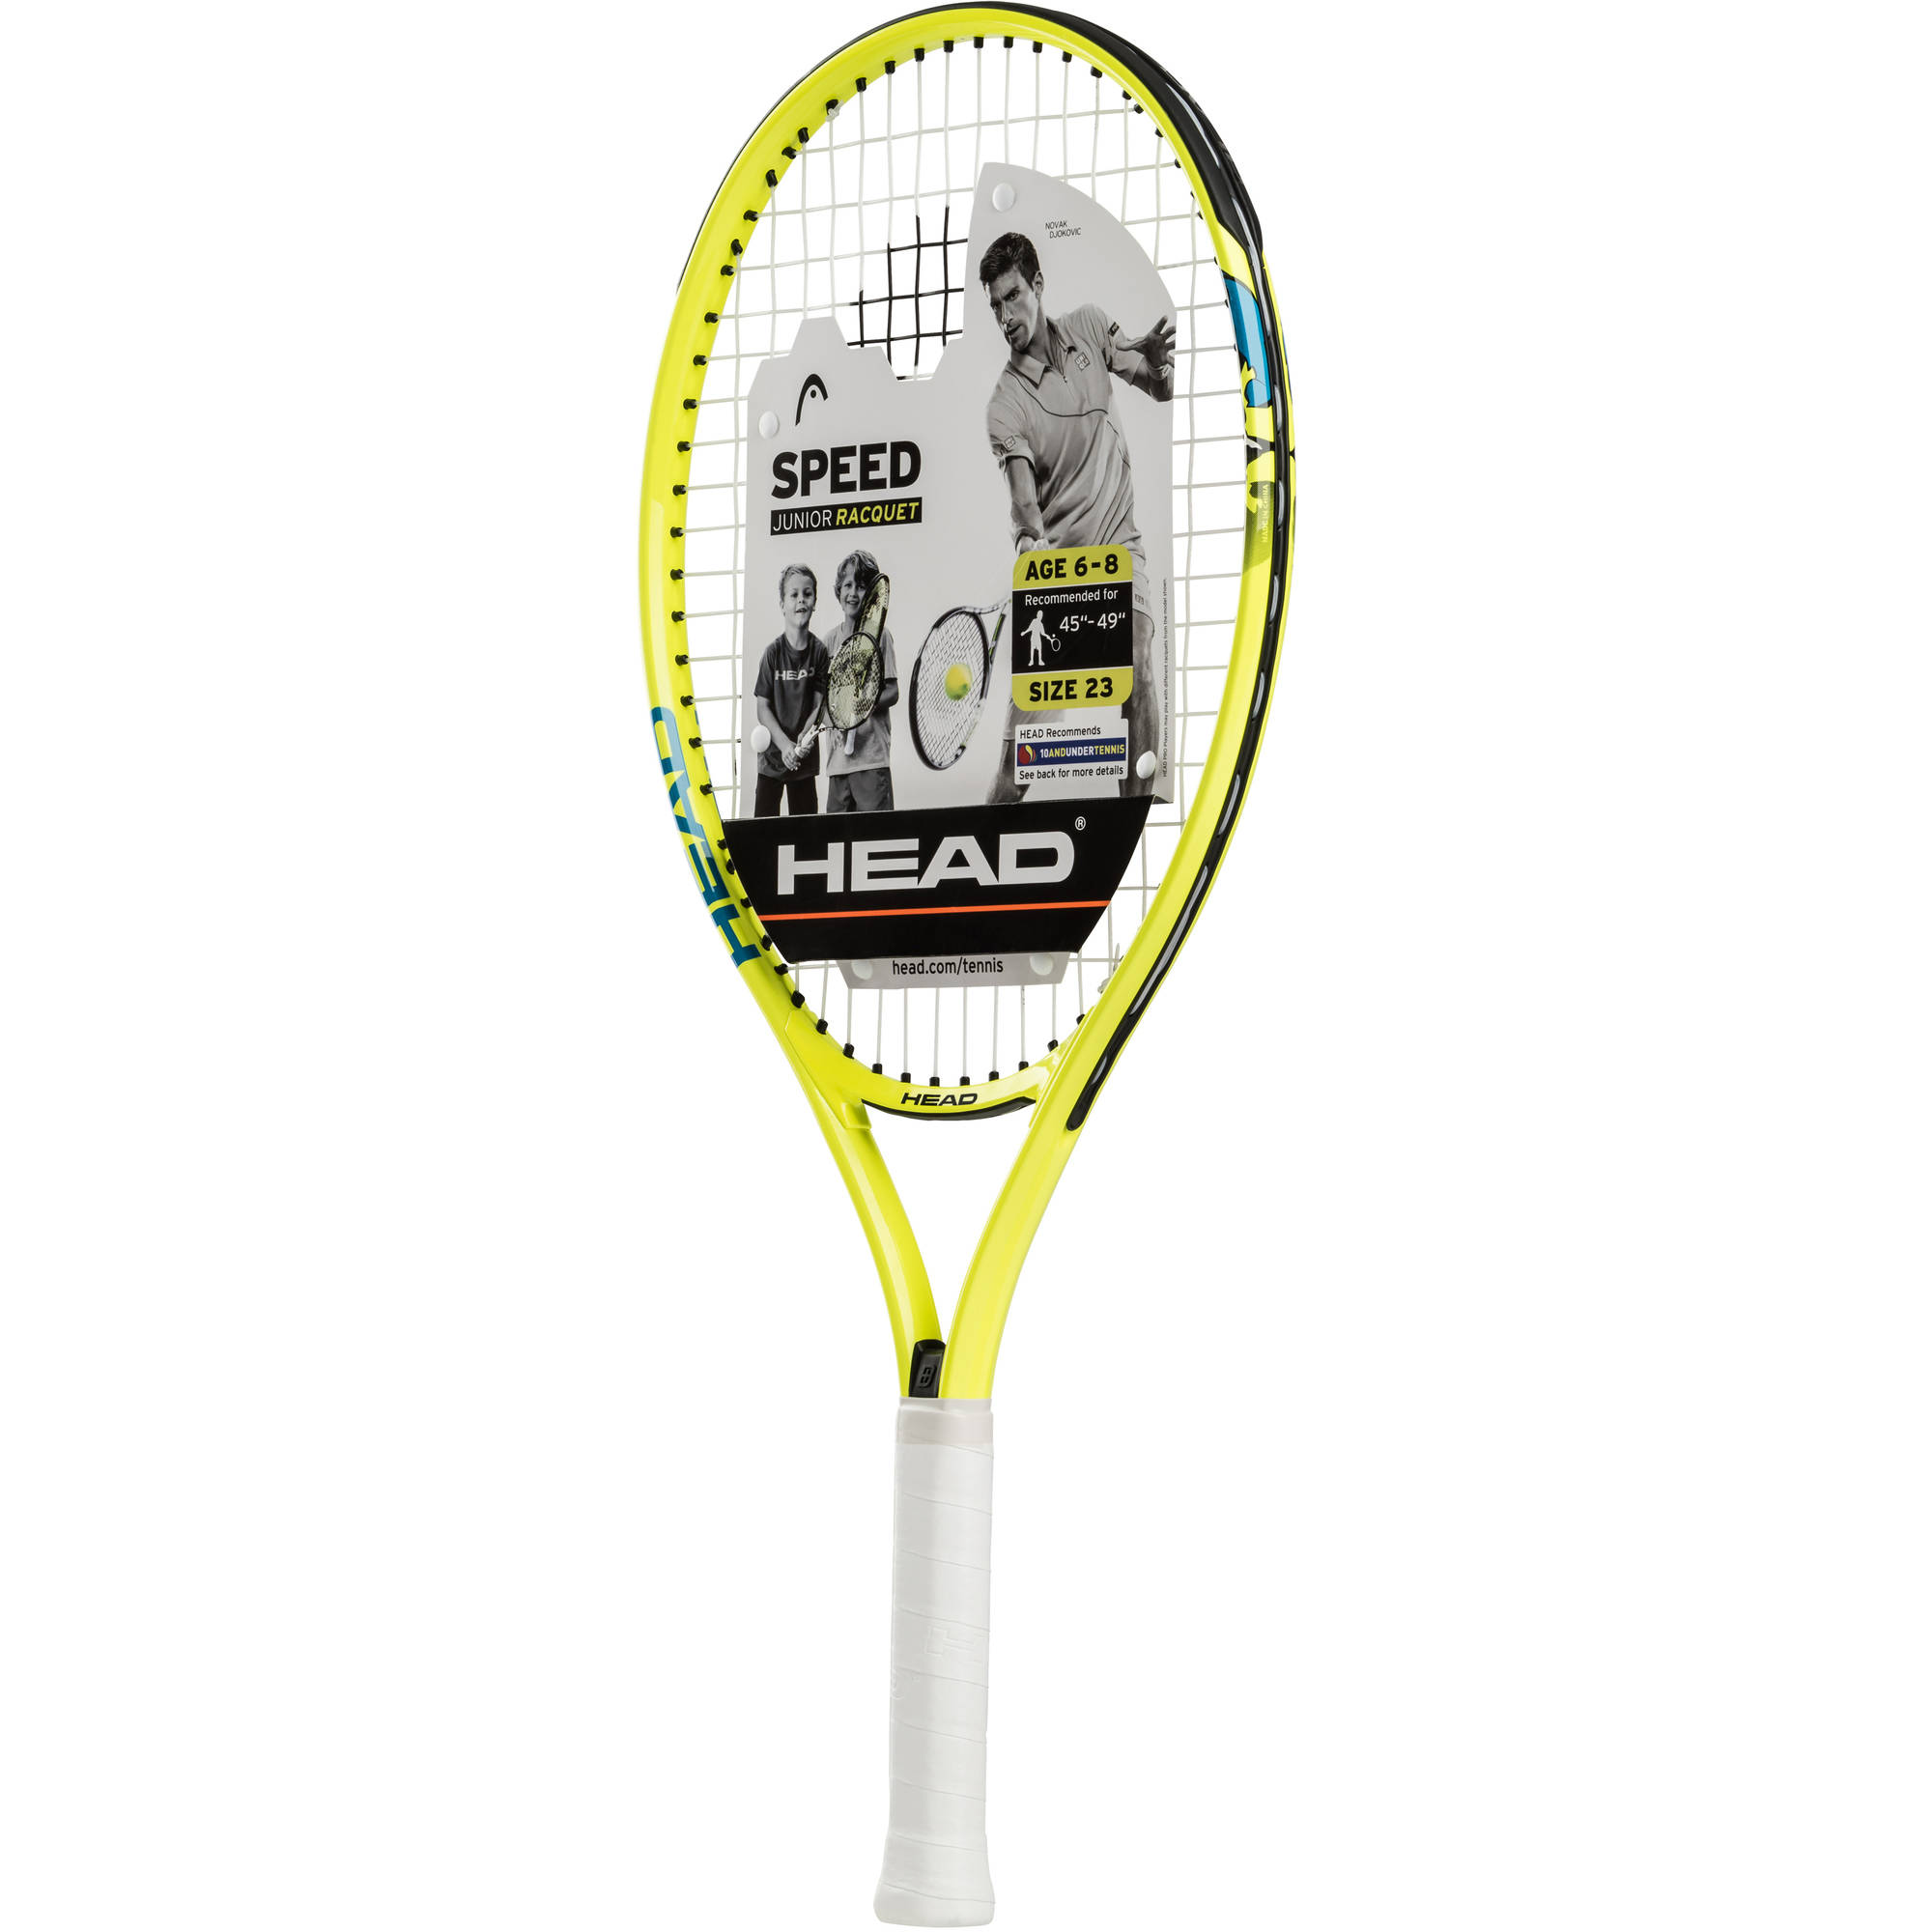 HEAD Speed 23 Junior Tennis Racquet, 107 Sq. in. Head Size, Yellow, 6.7 Ounces - image 1 of 3